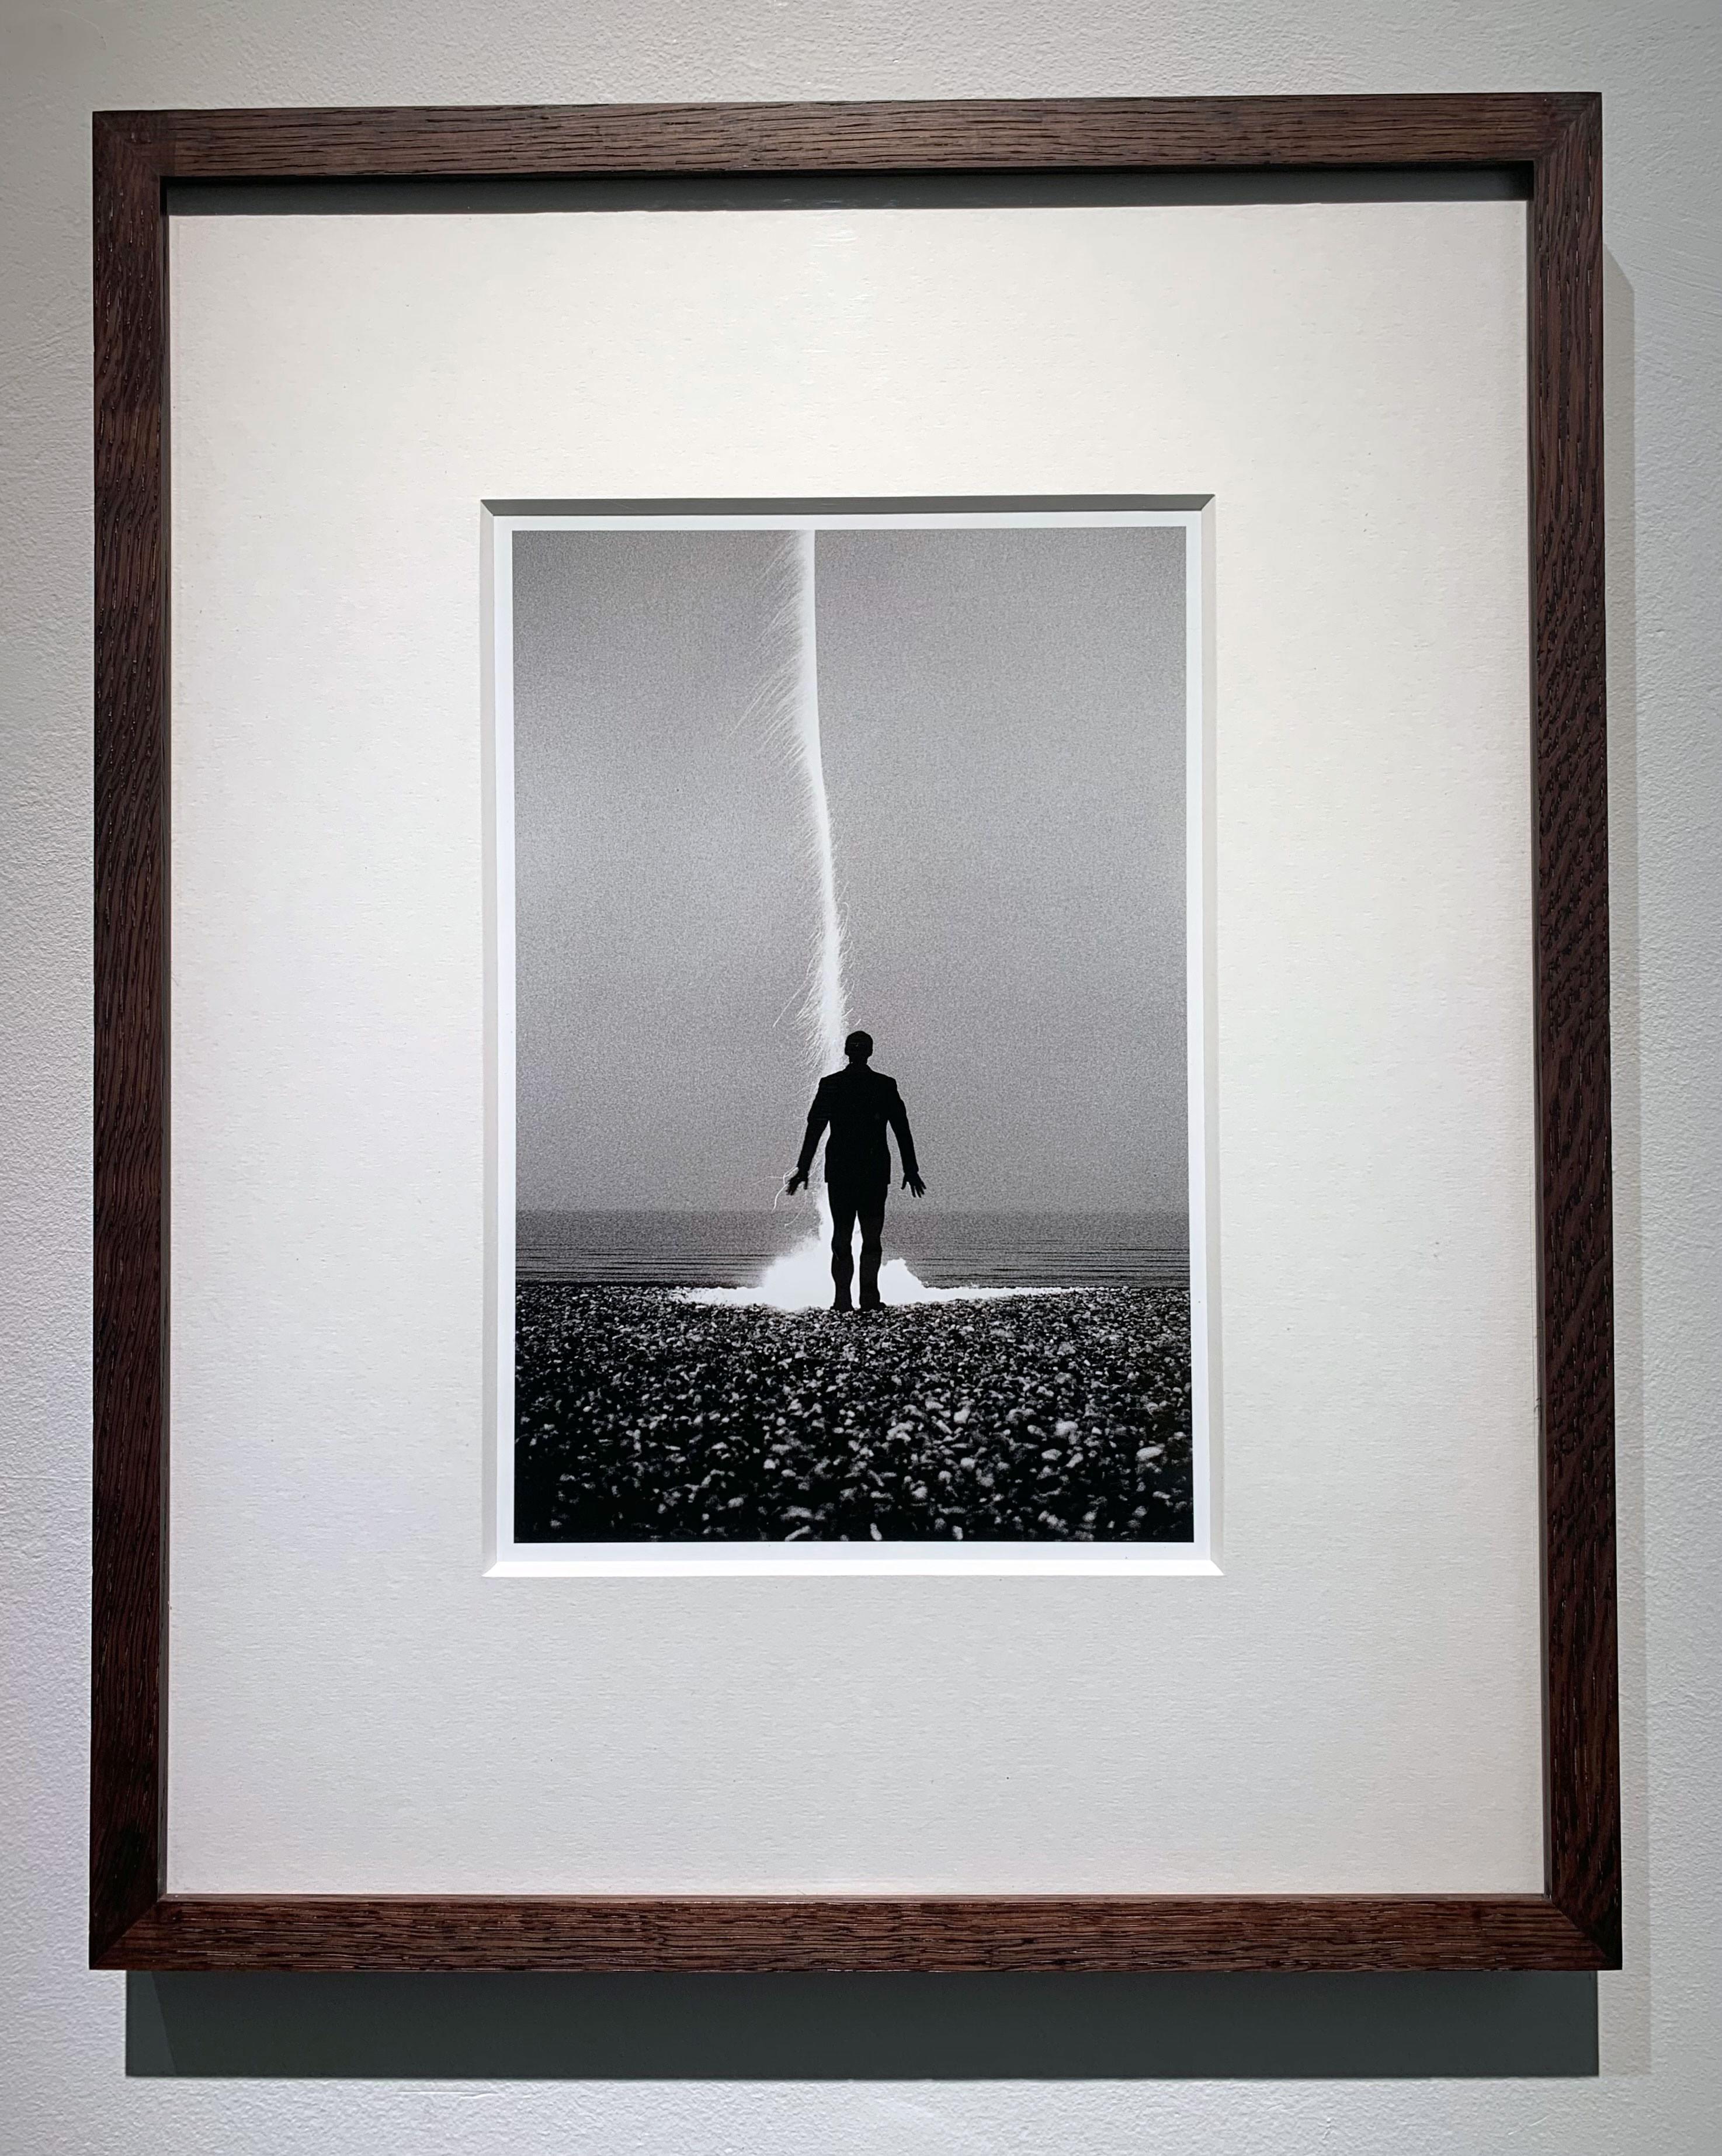 Rocket Man, Dungeness, Kent, 1979 / Howard Jones - Crossed That Line 1989 - Photograph by Brian Griffin